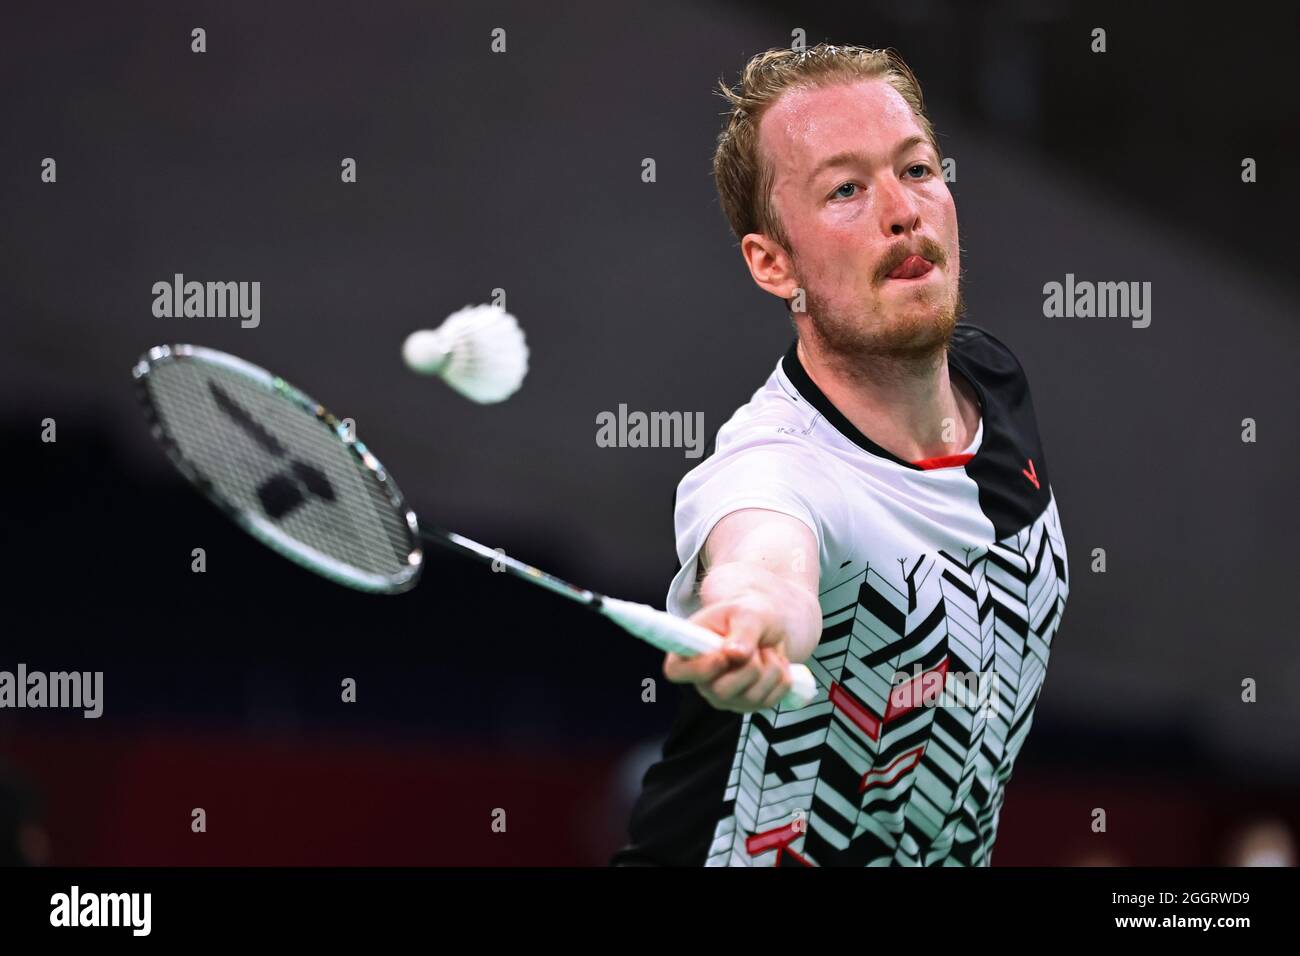 Tokyo 2020 Paralympic Games - Badminton - Men's Singles SL4 Group Play Stage - Group A - Yoyogi National Stadium, Tokyo, Japan - September 3, 2021. Jan-Niklas Pott of Germany in action against Lucas Mazur of France. REUTERS/Thomas Peter Stock Photo